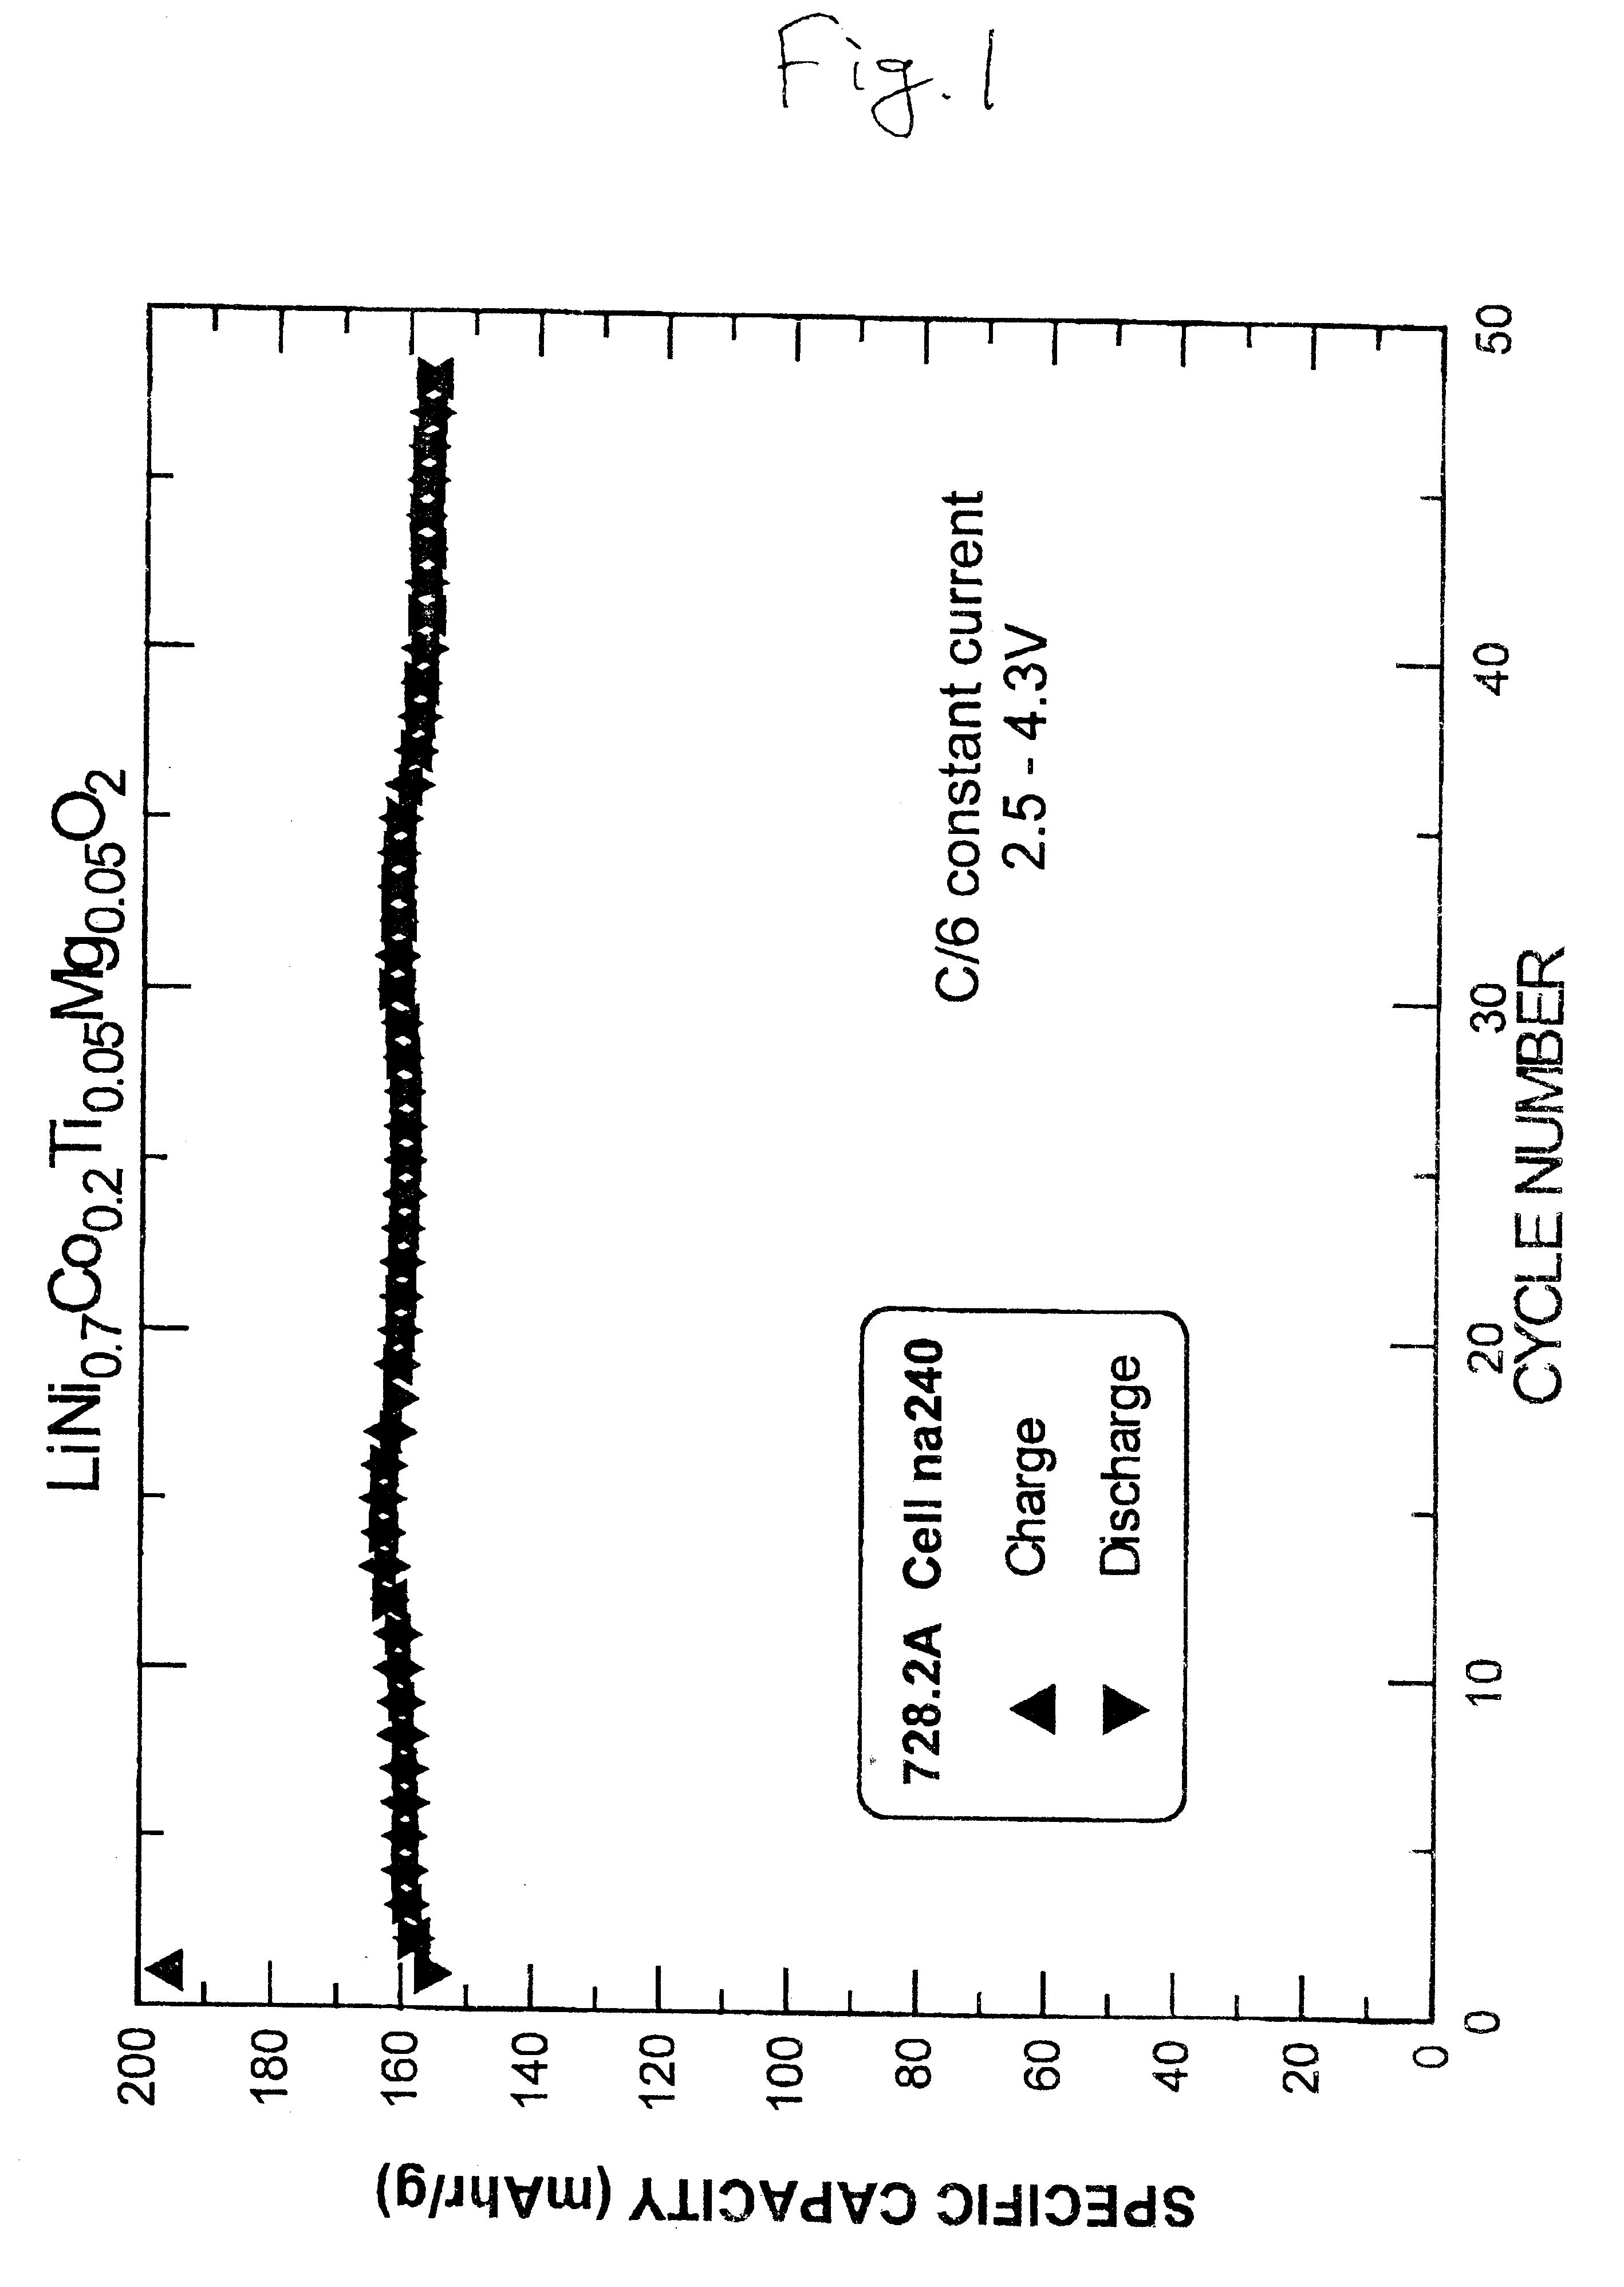 Lithium metal oxide containing multiple dopants and method of preparing same